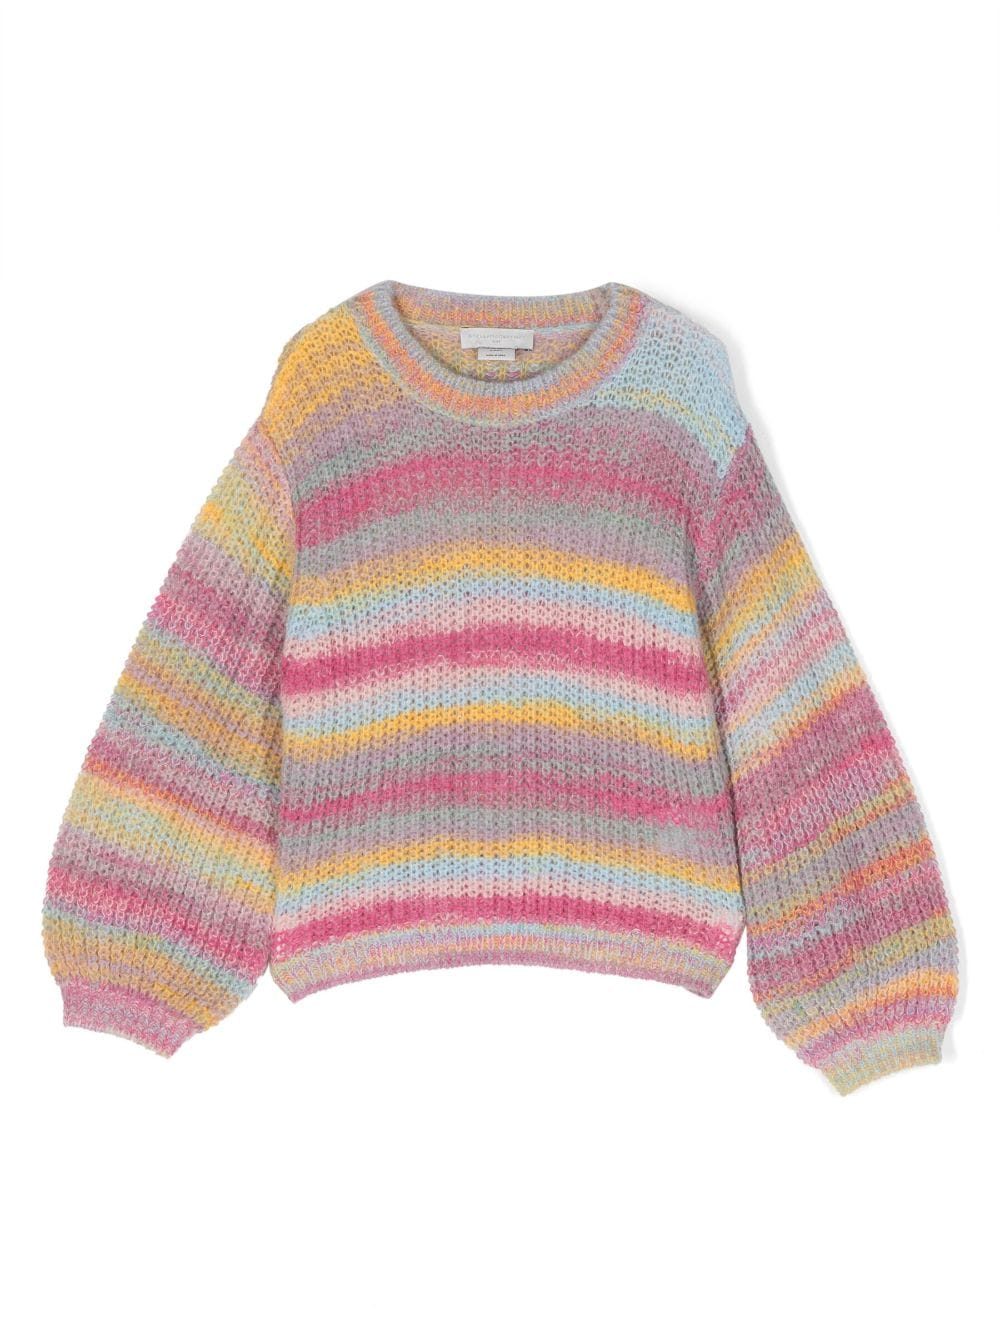 Multicolored sweater for girls